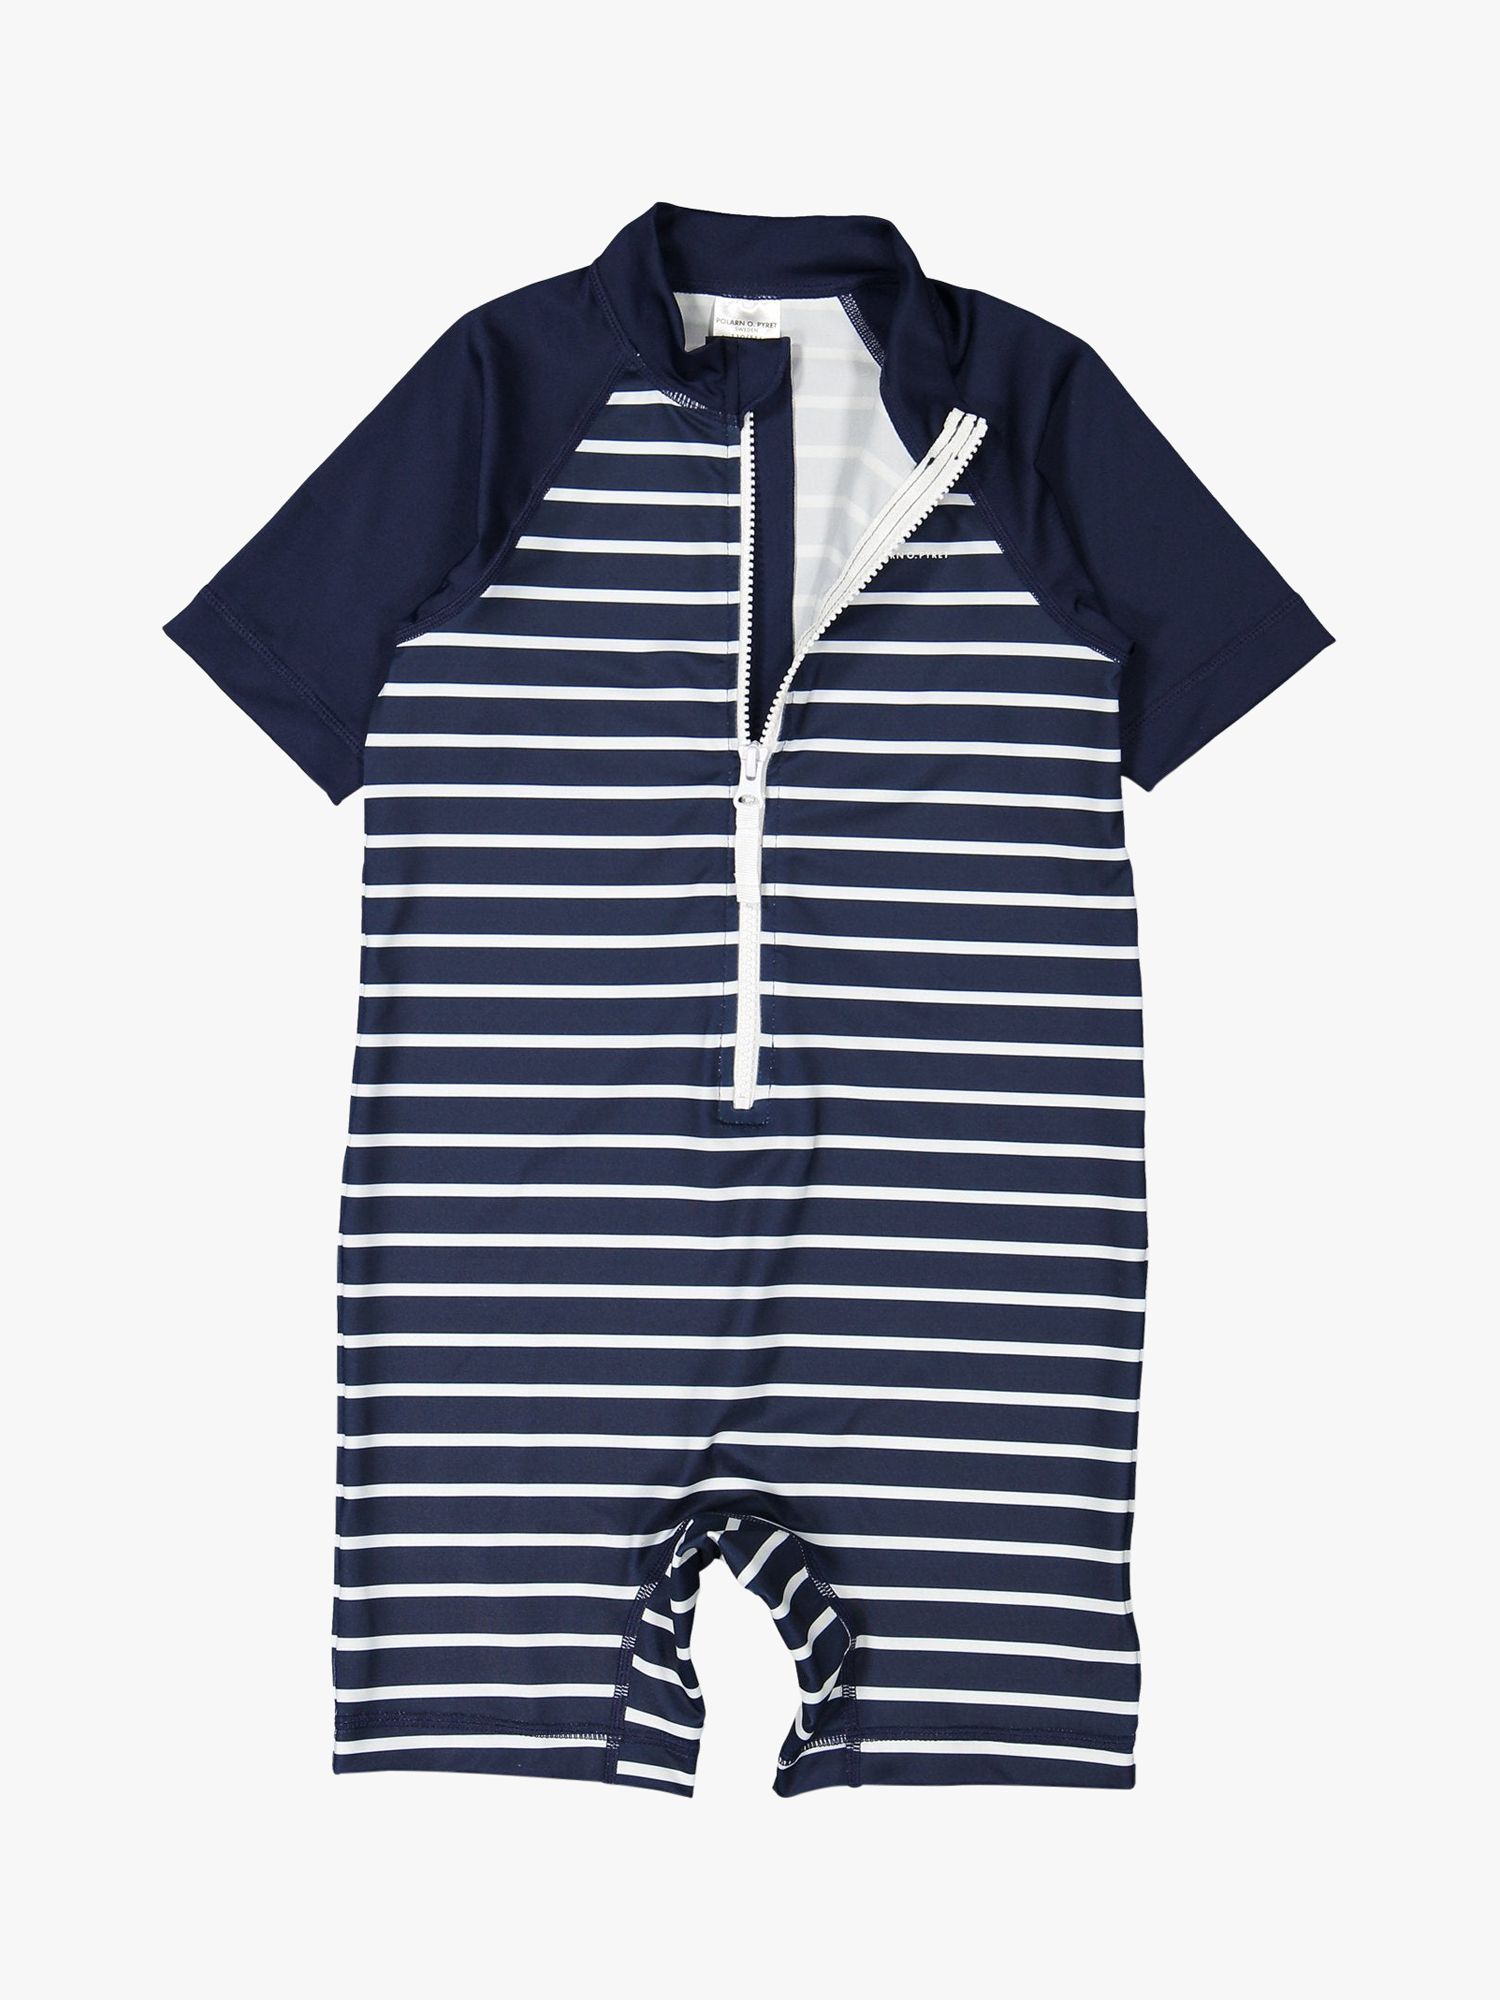 Buy Polarn O. Pyret Kids' Stripe All-In-One Swimsuit, Navy Online at johnlewis.com